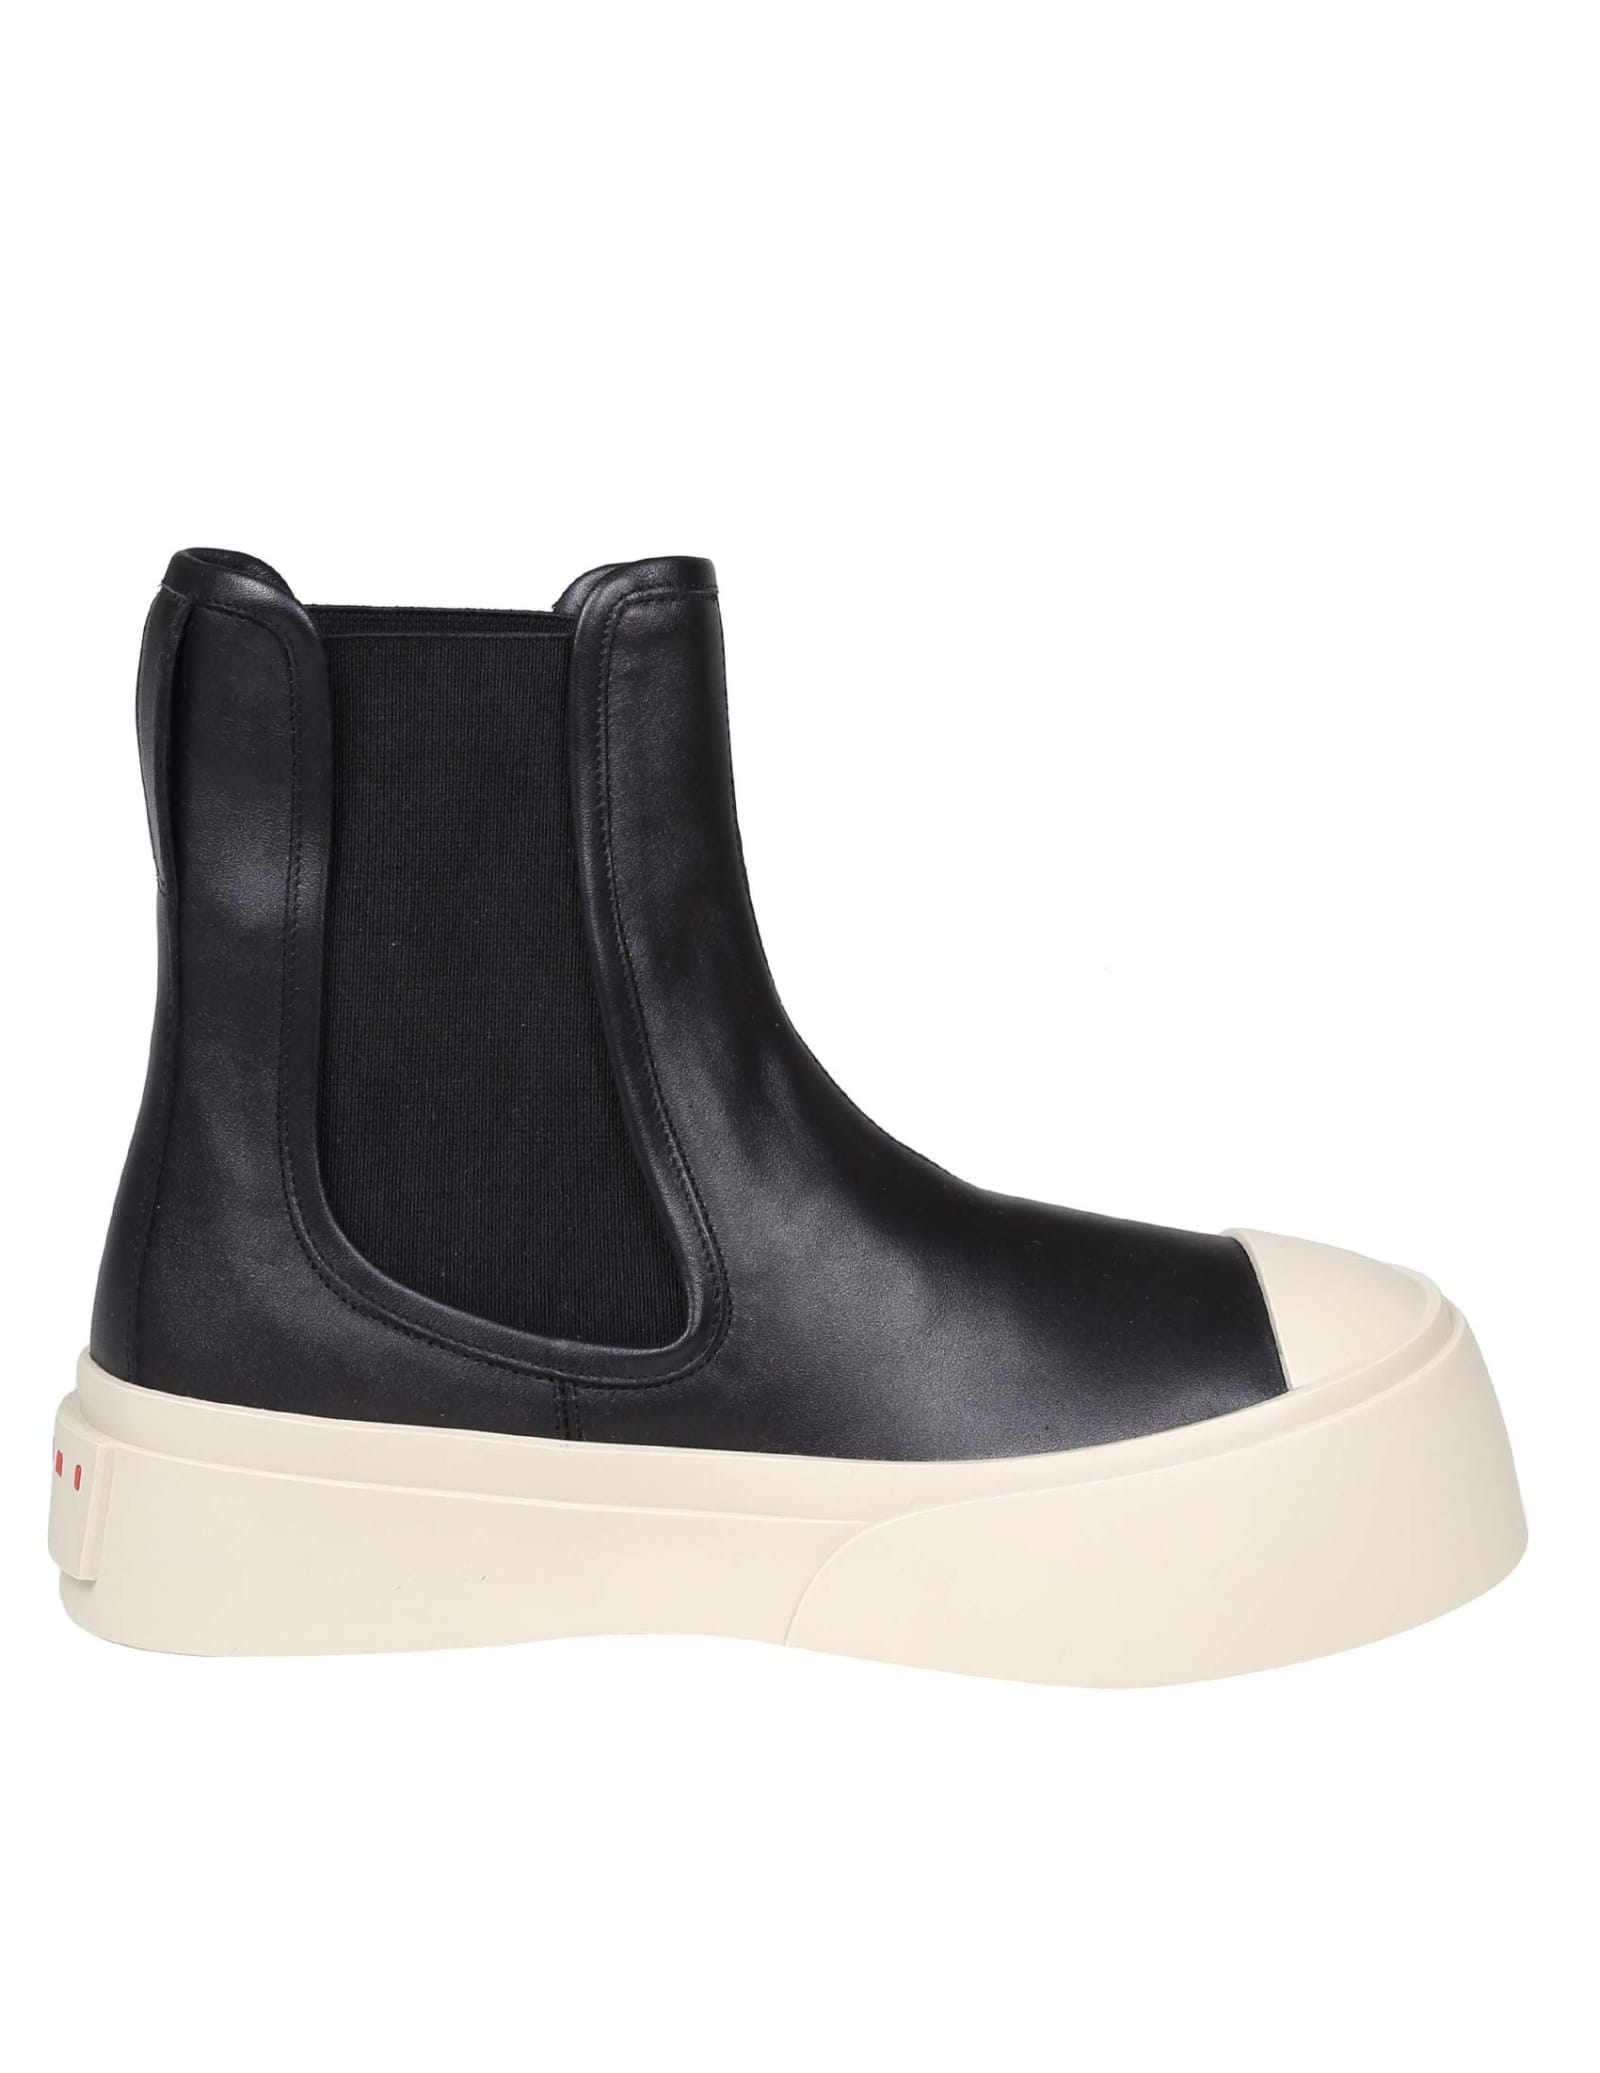 Marni Chelsea Ankle Boots In Black Nappa